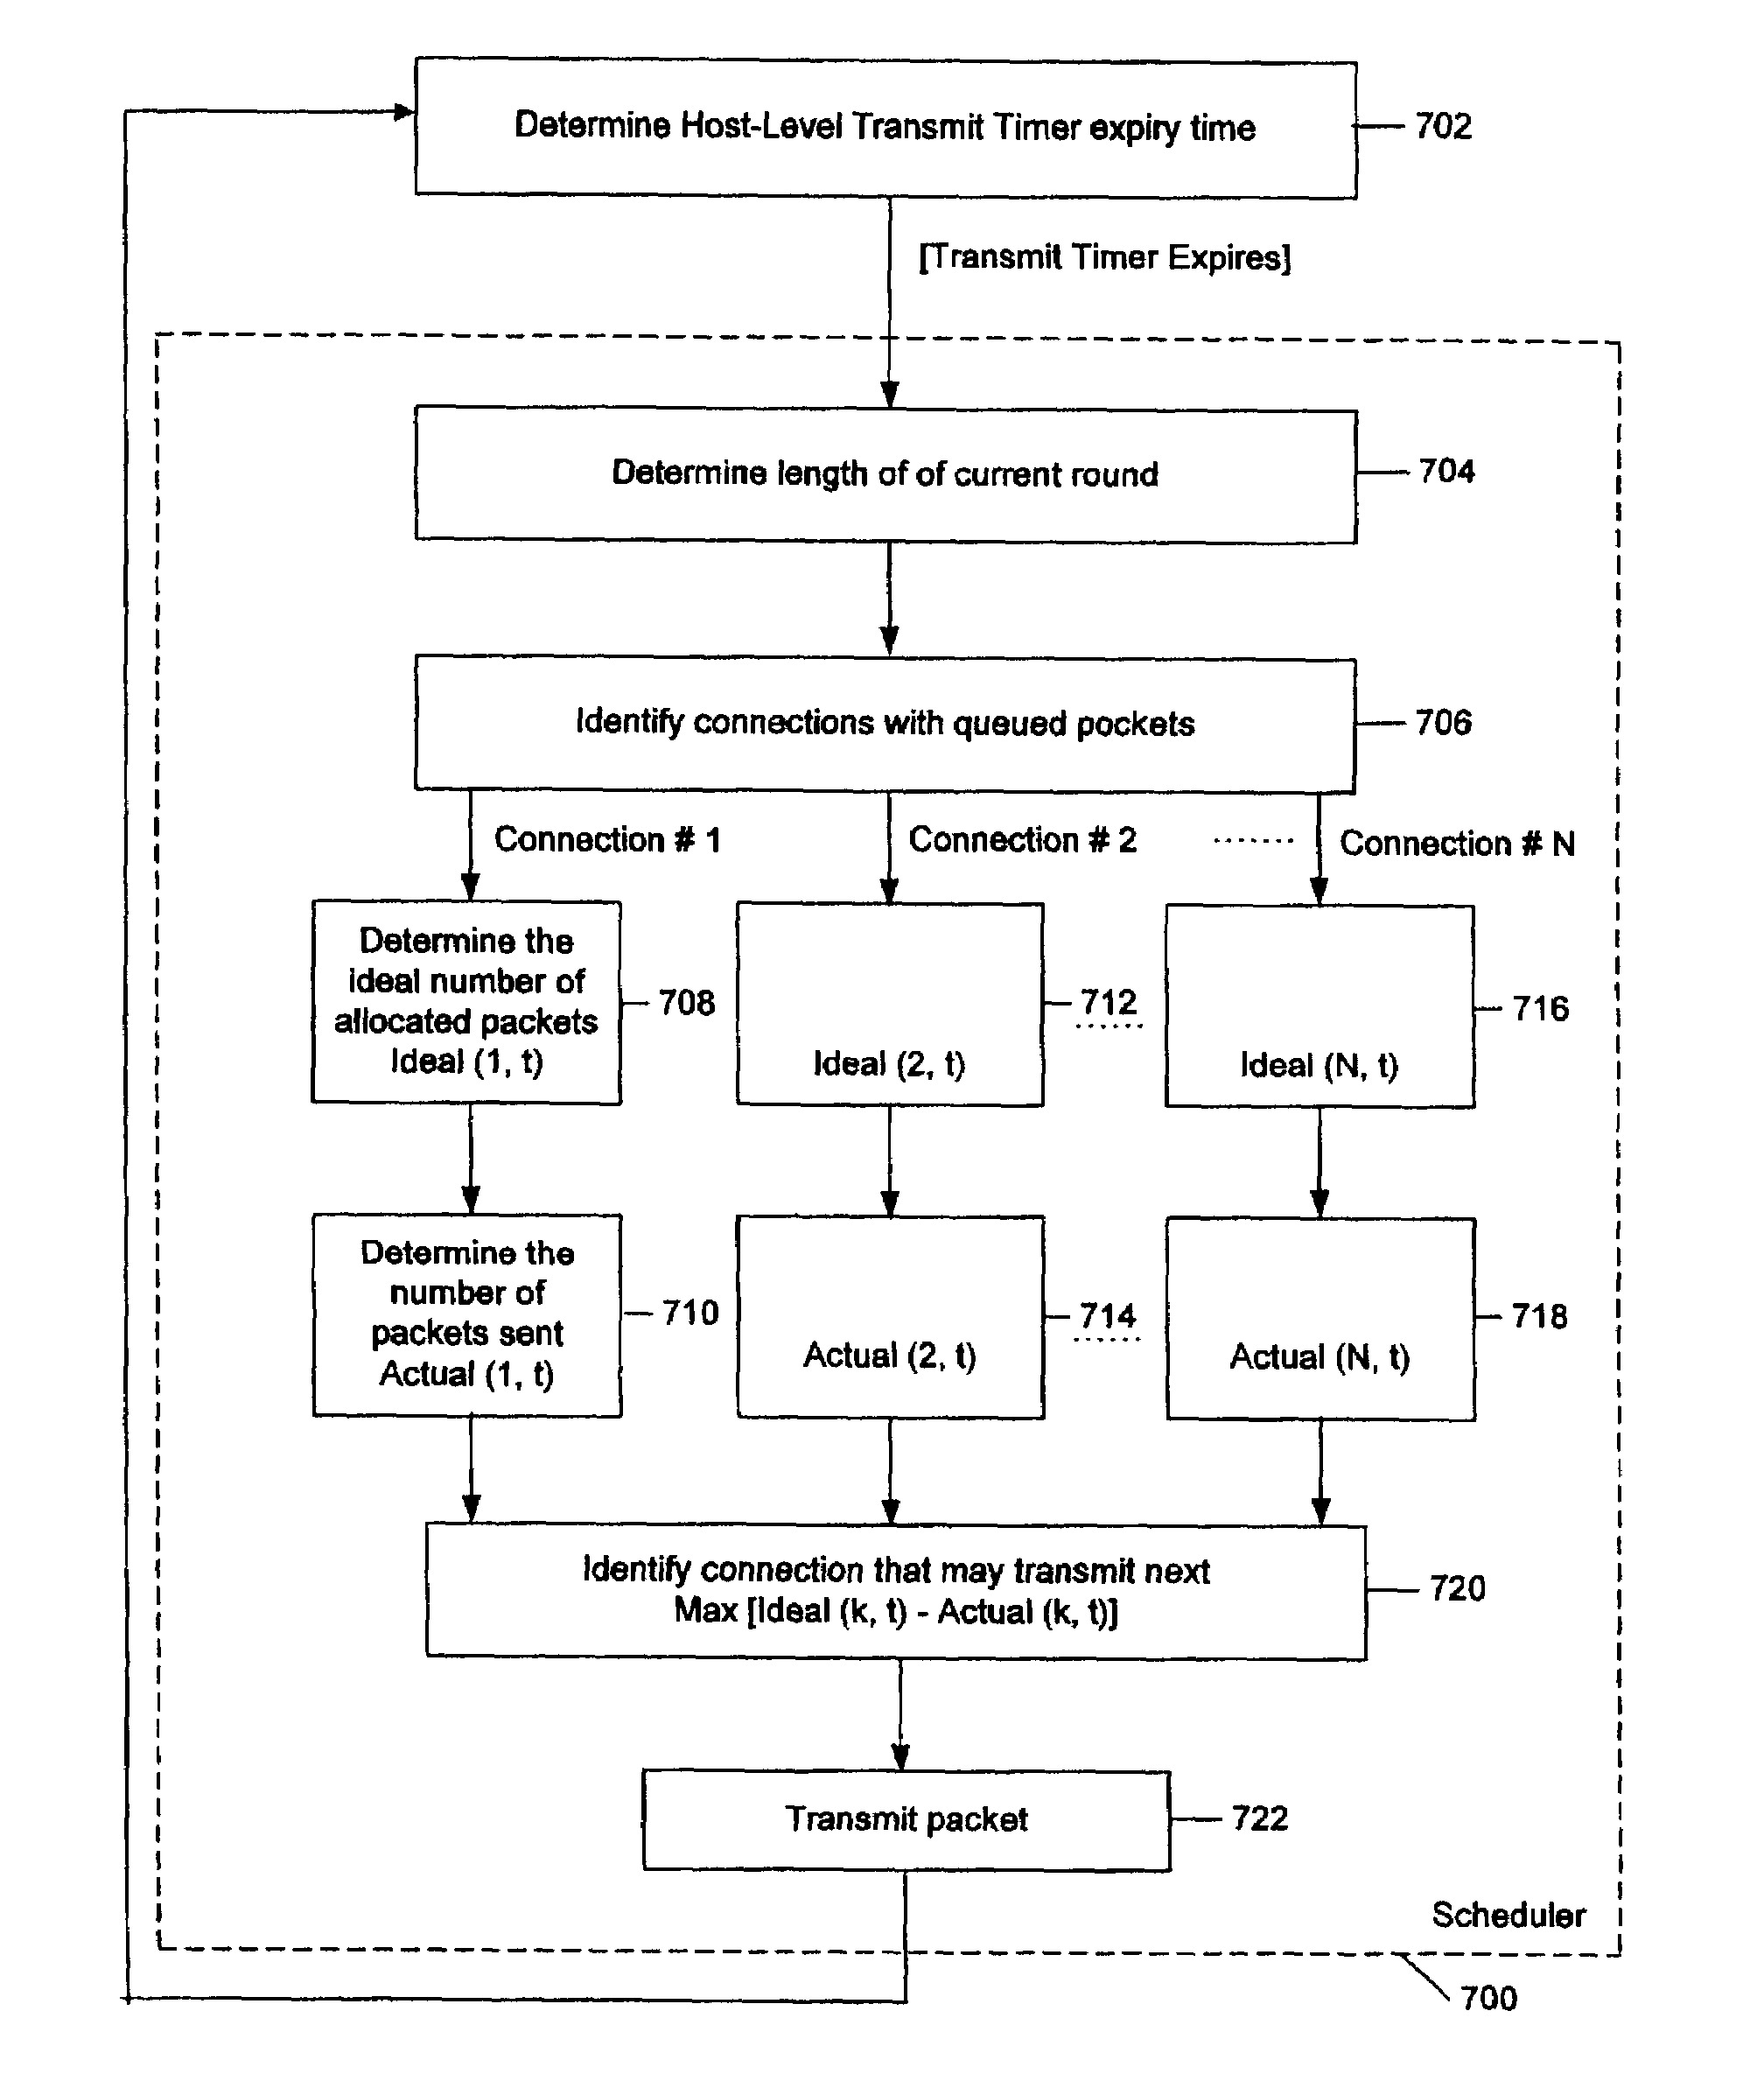 Quality of service management for multiple connections within a network communication system